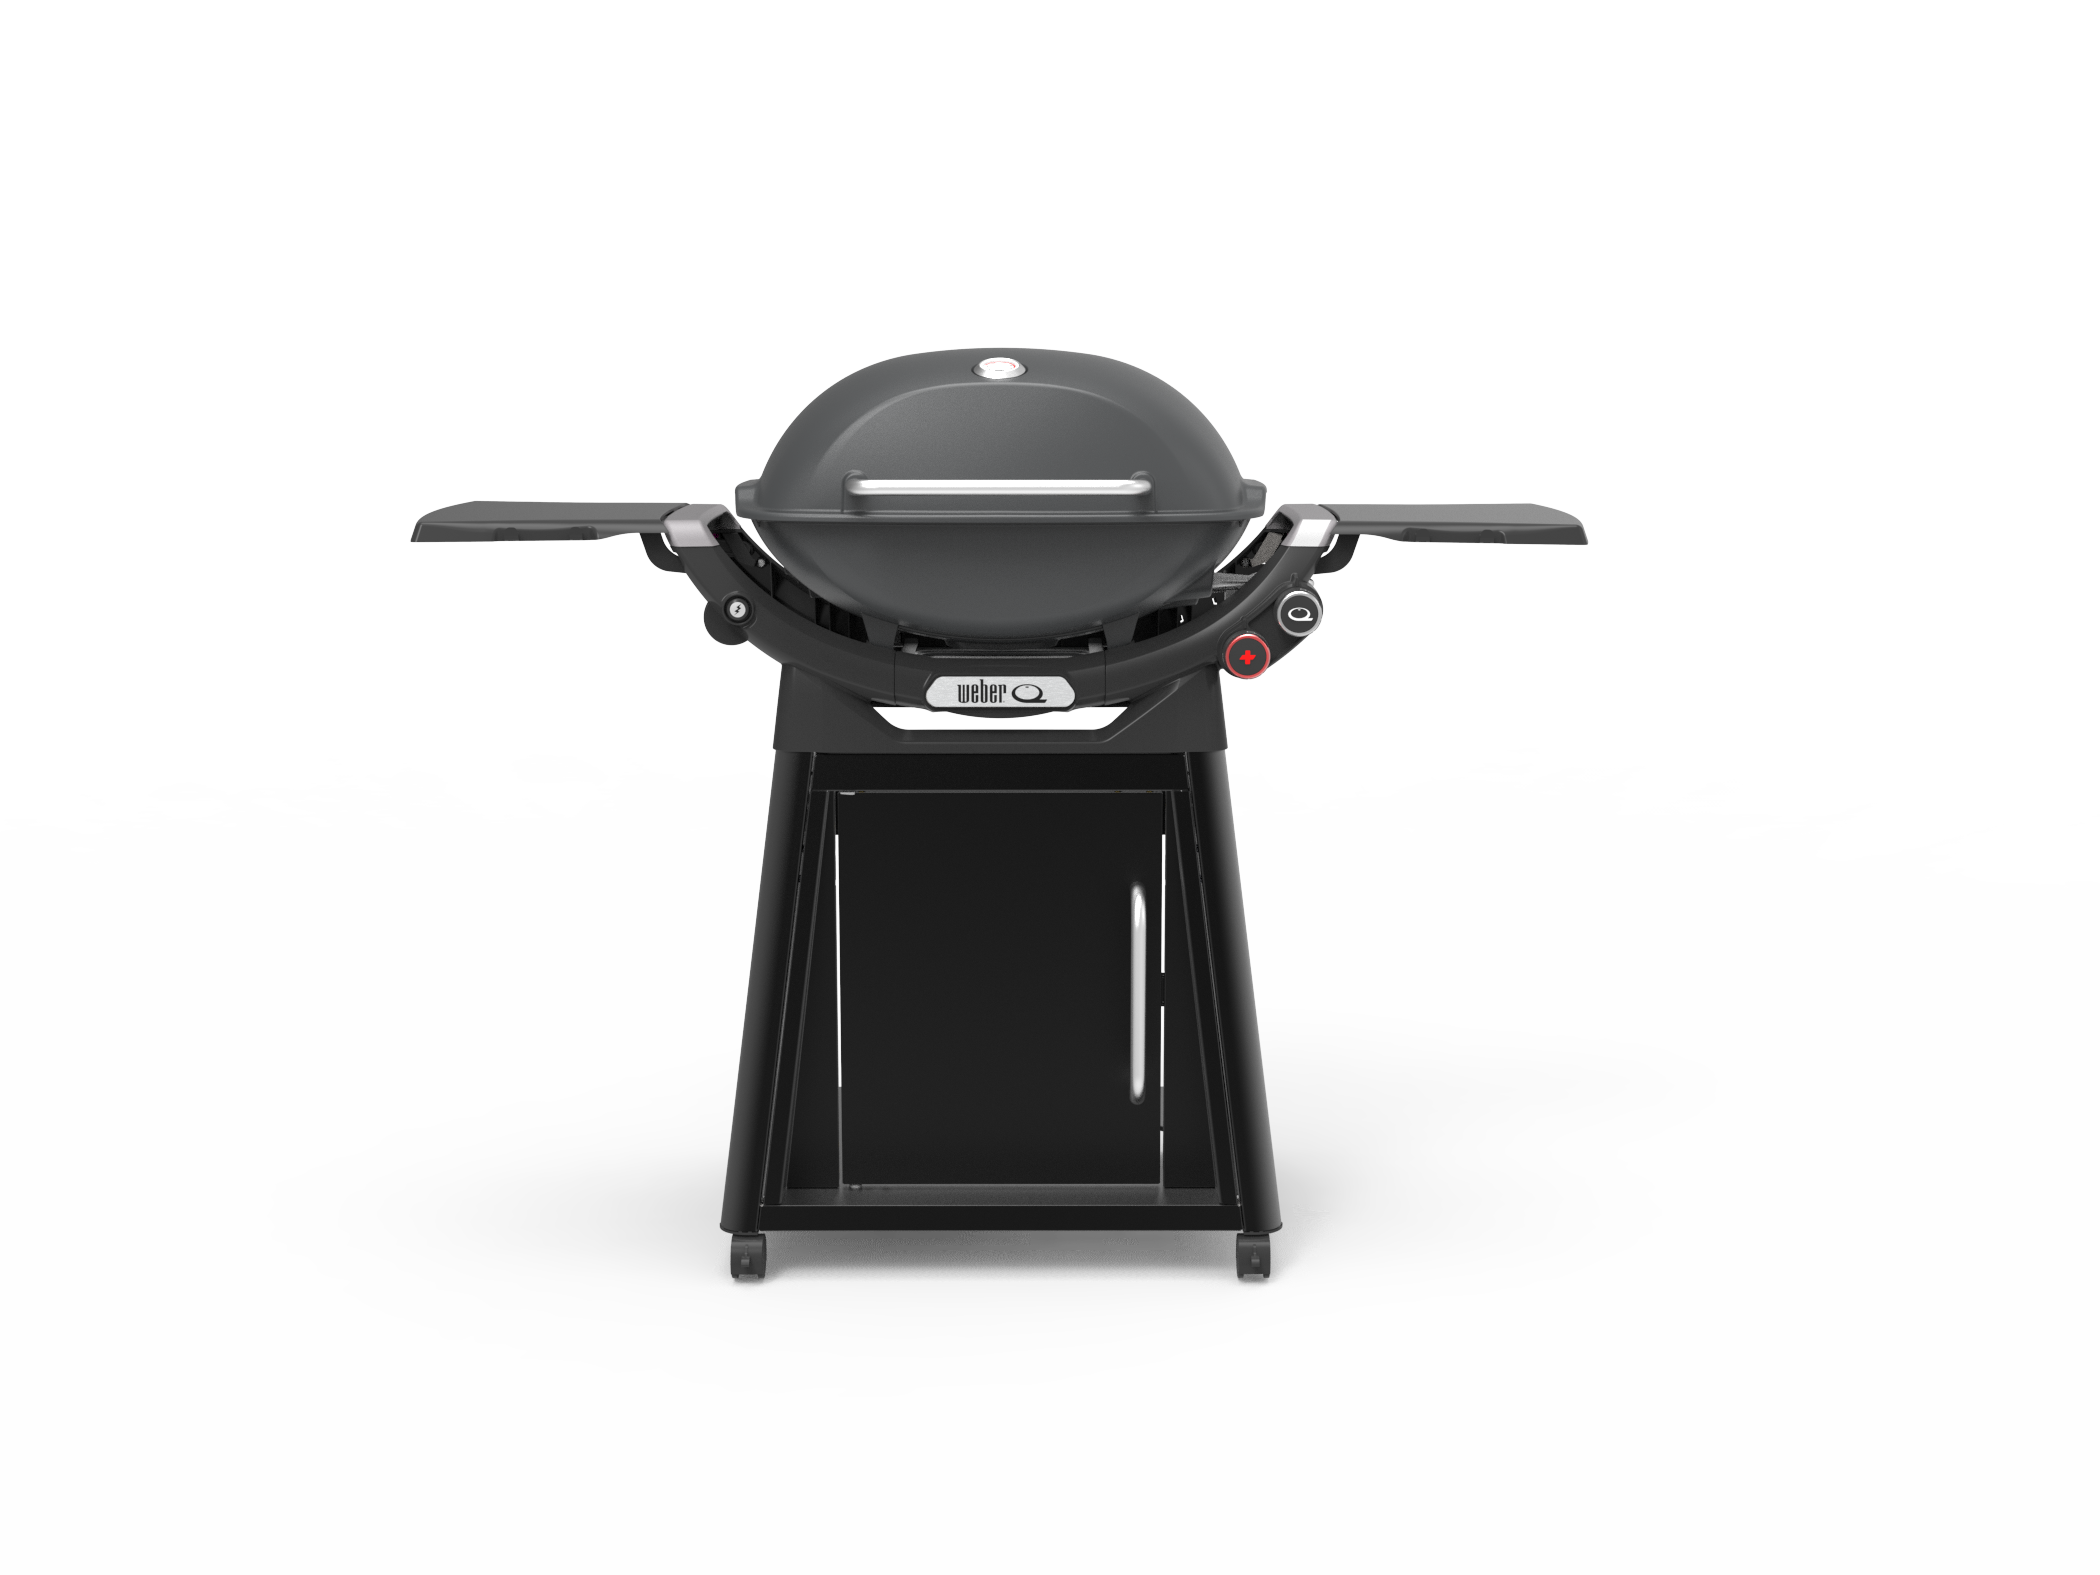 Weber Q Q3200N+ front view in Charcoal Grey